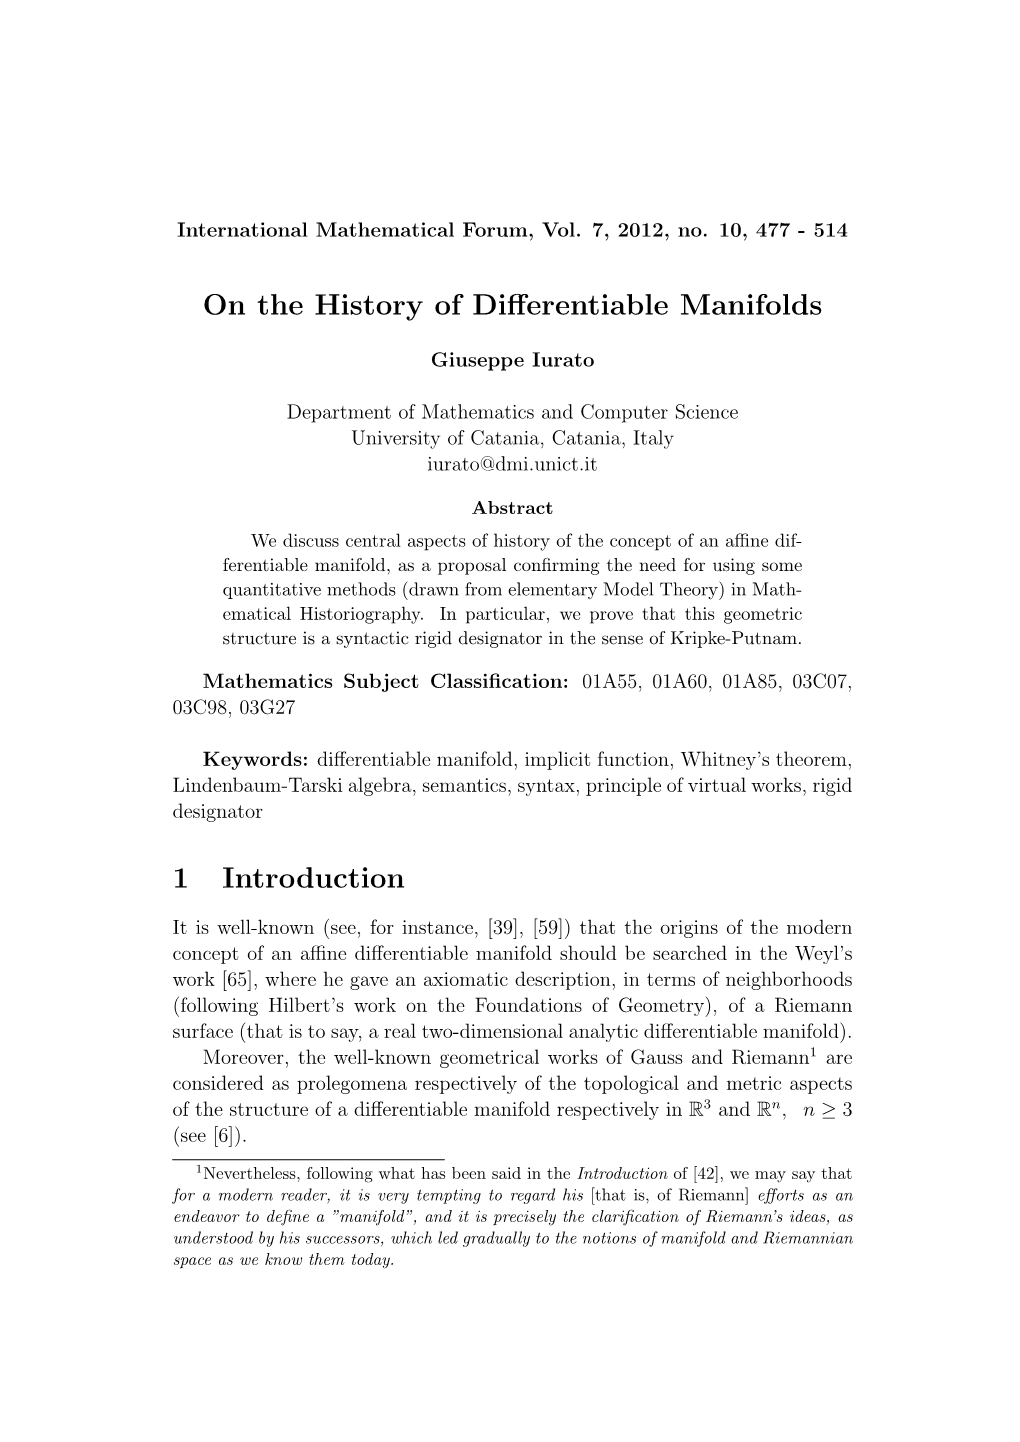 On the History of Differentiable Manifolds